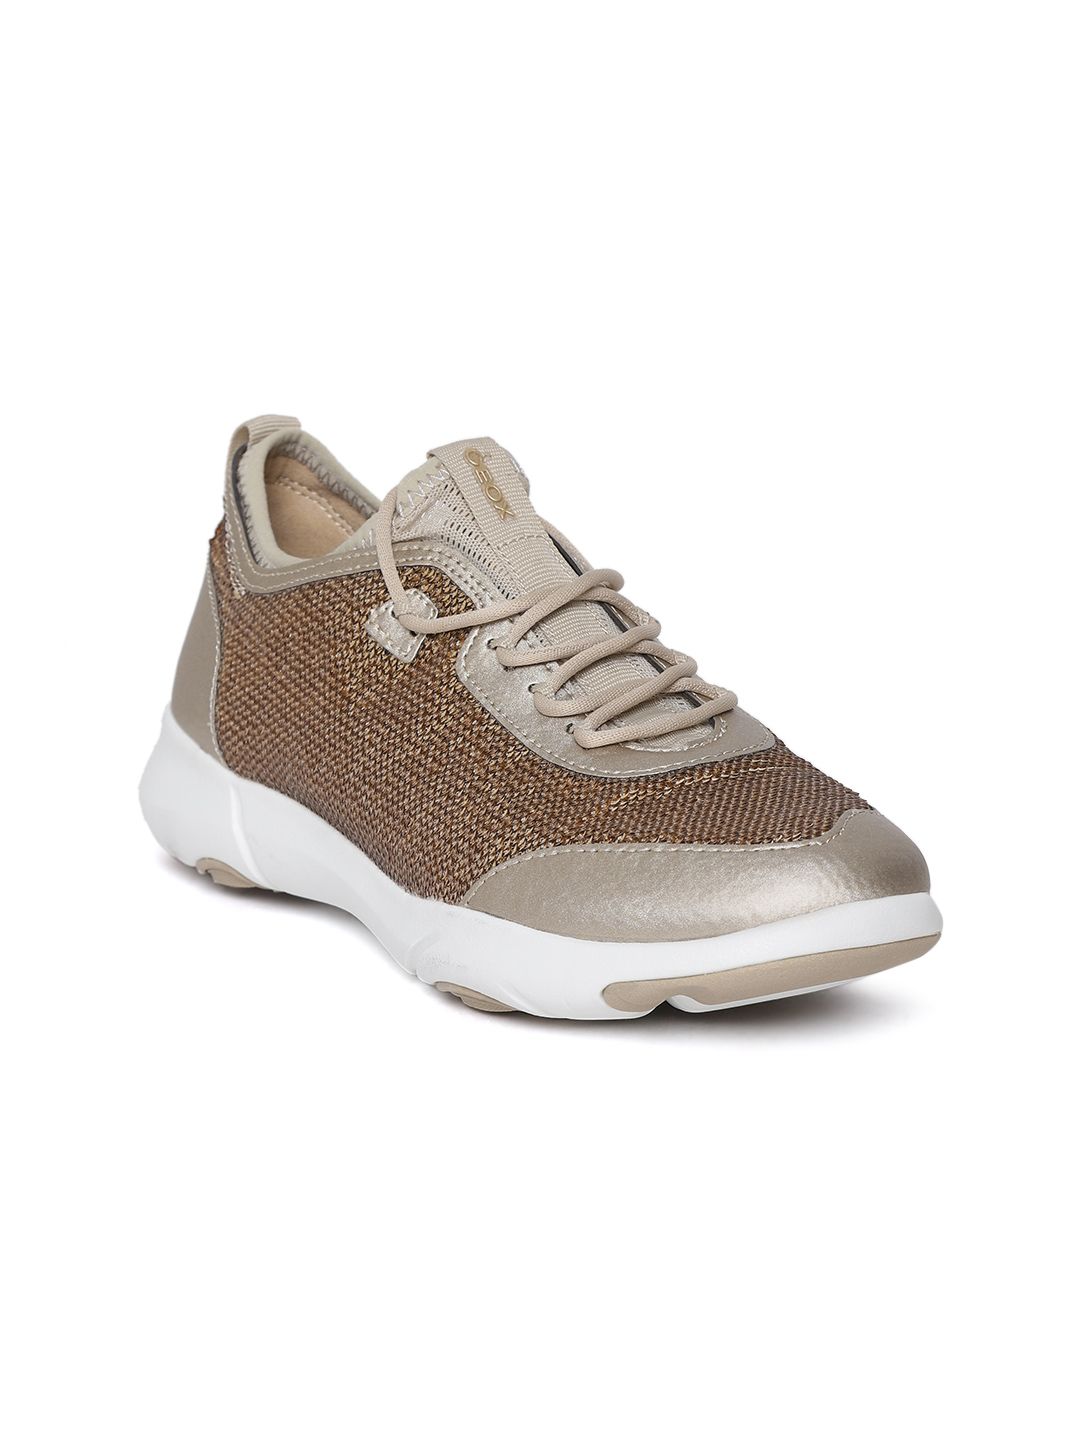 Geox Women Gold-Toned Sequinned Sneakers Price in India